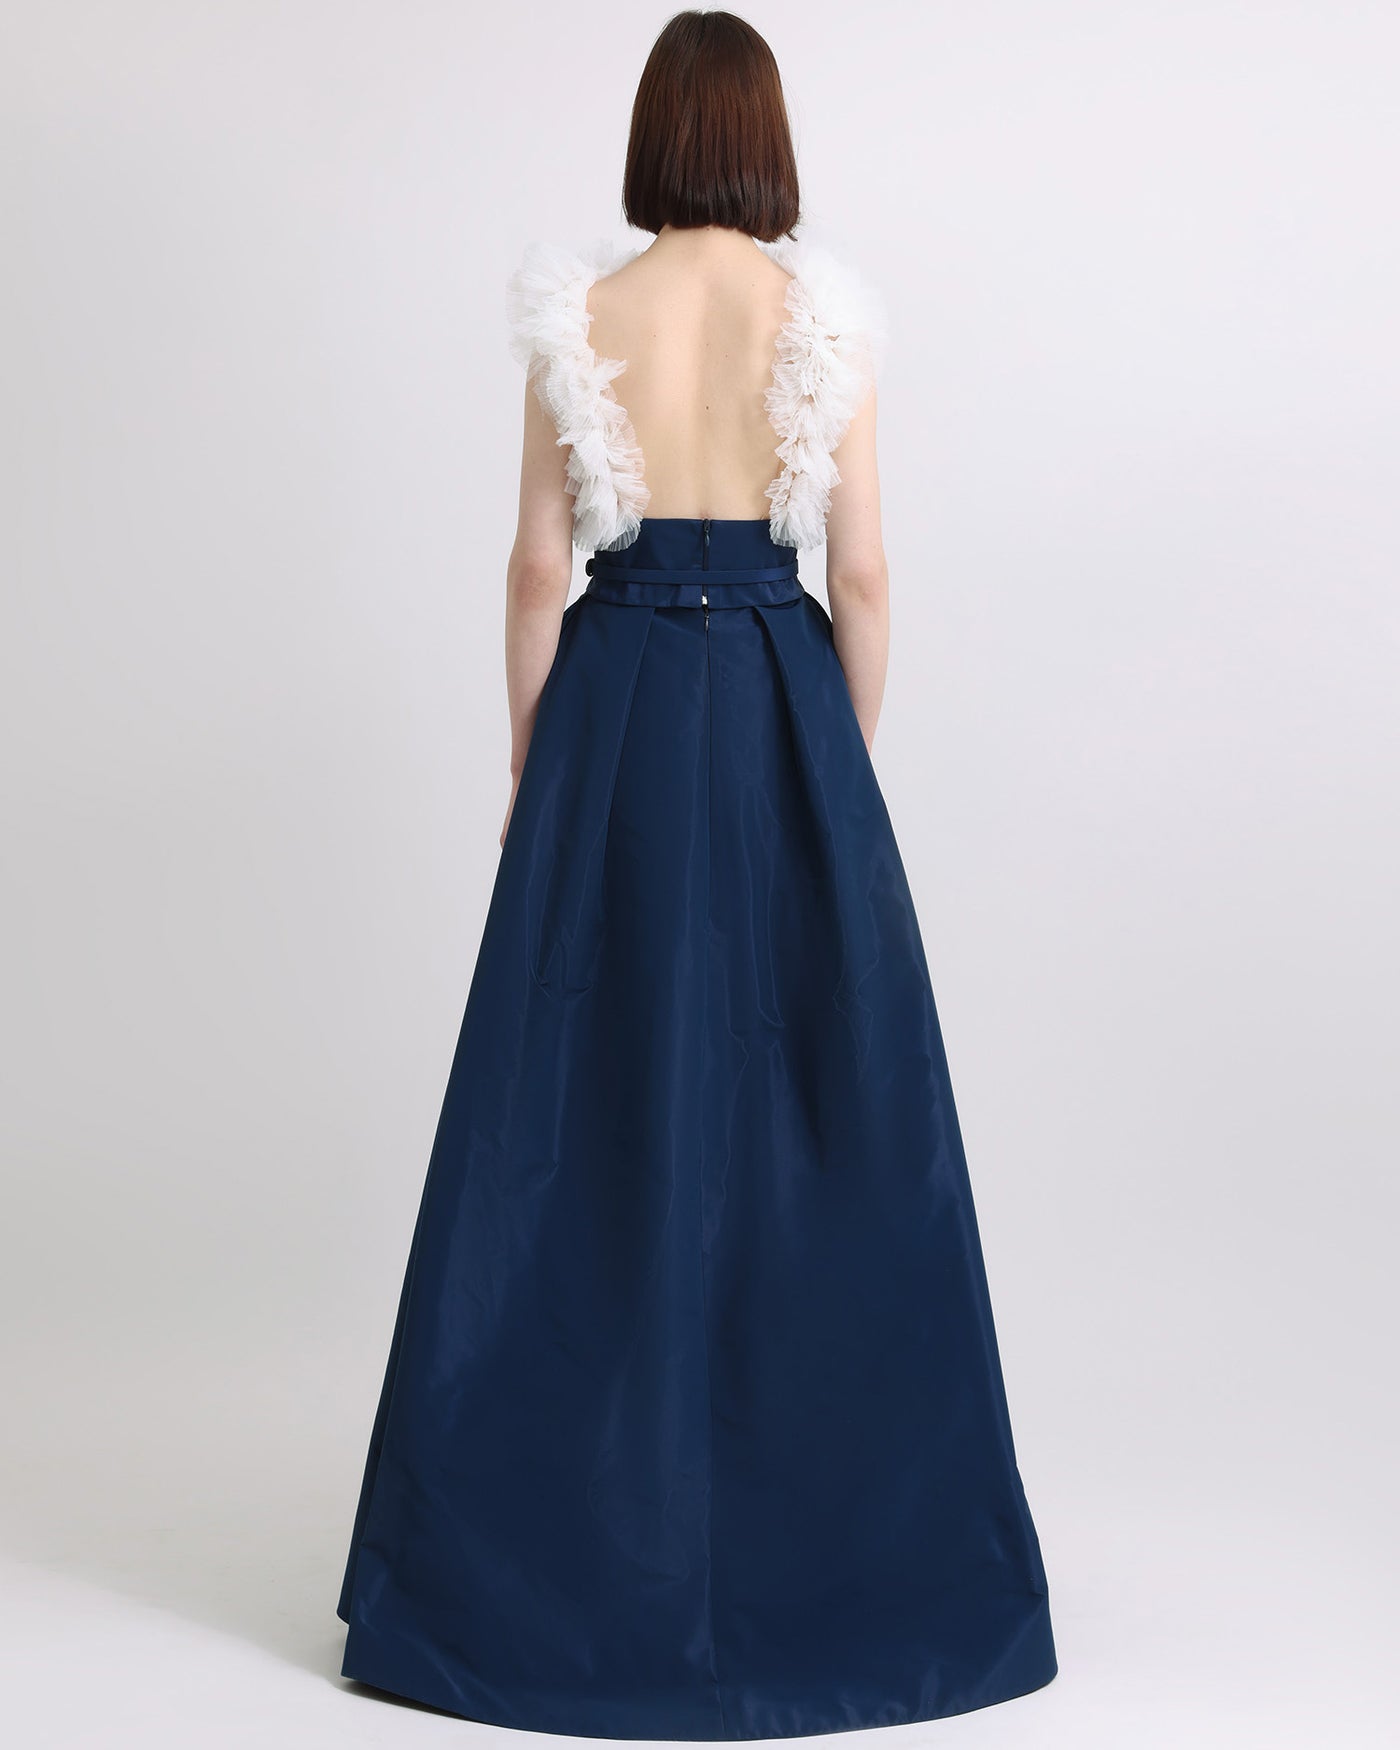 Backless Tulle Top with Long Skirt